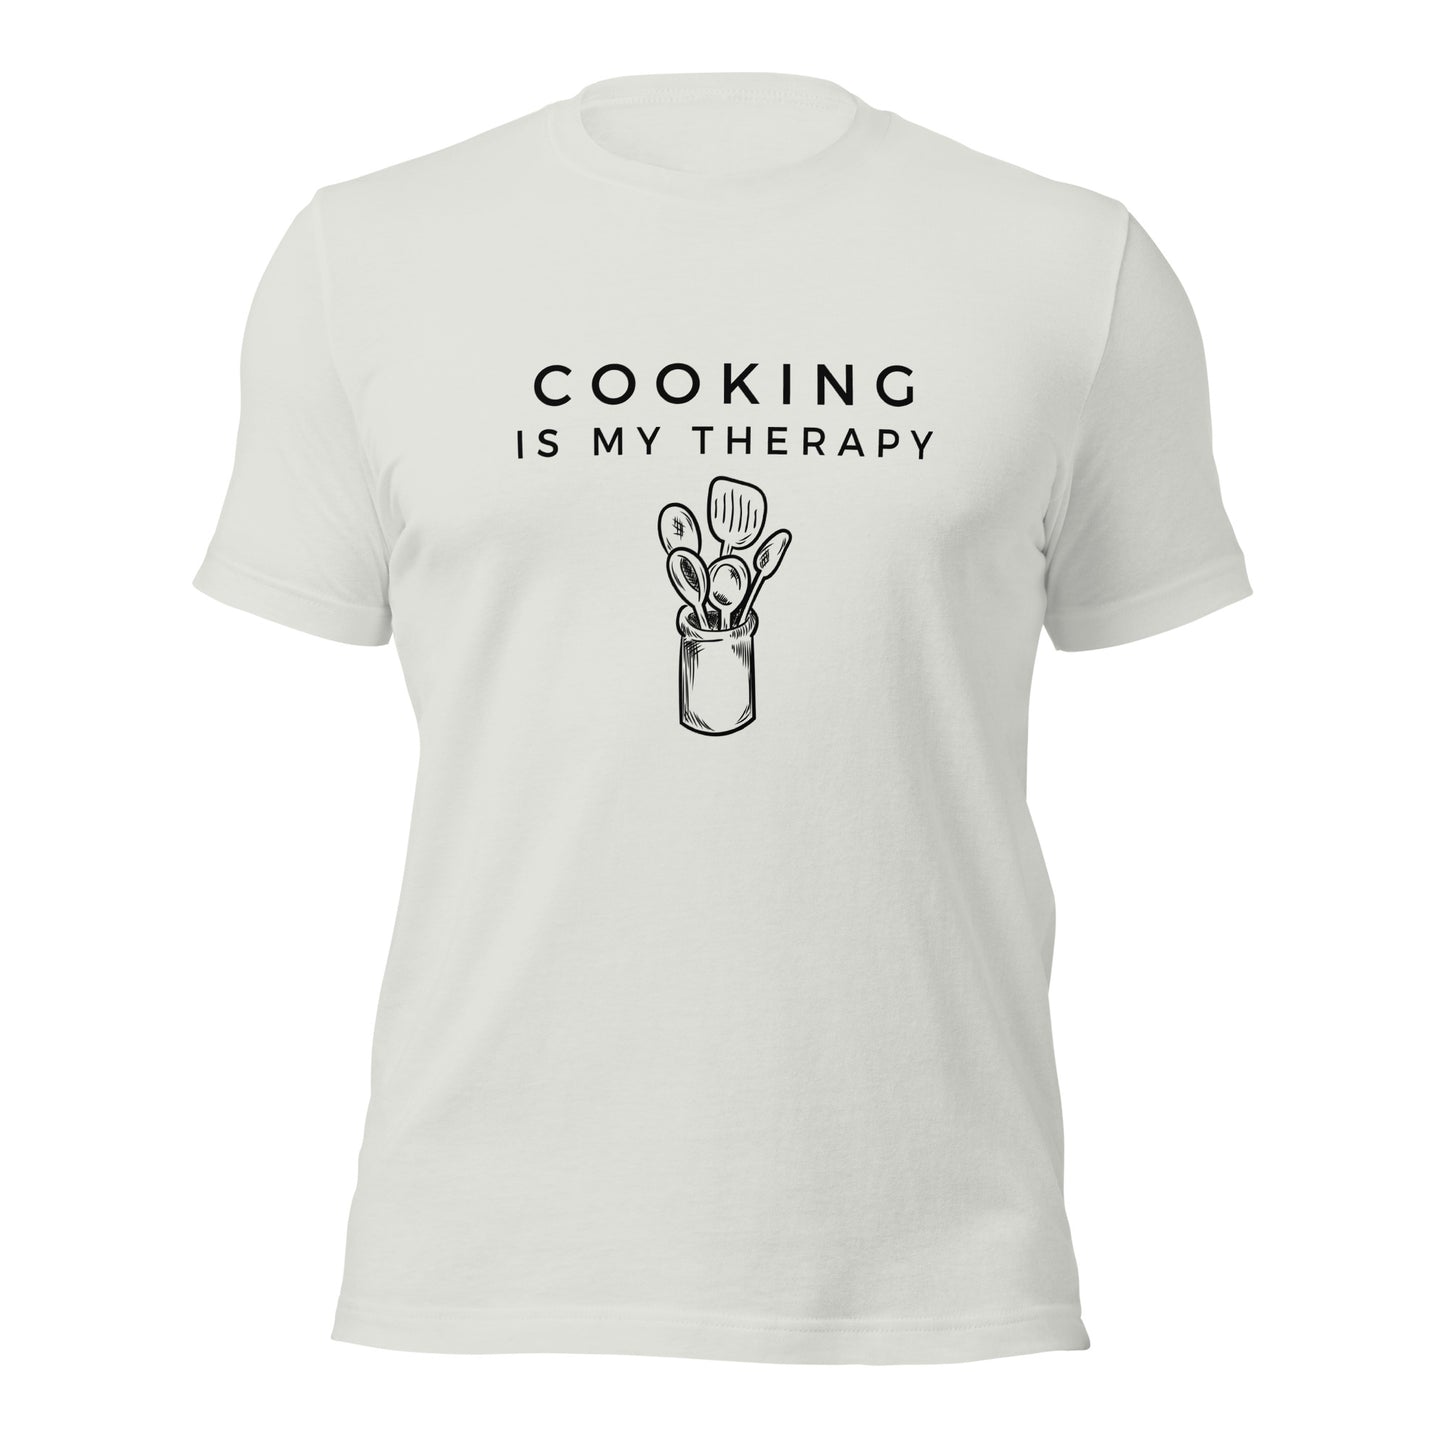 Unique gift idea for chefs – "Cooking Is My Therapy" t-shirt